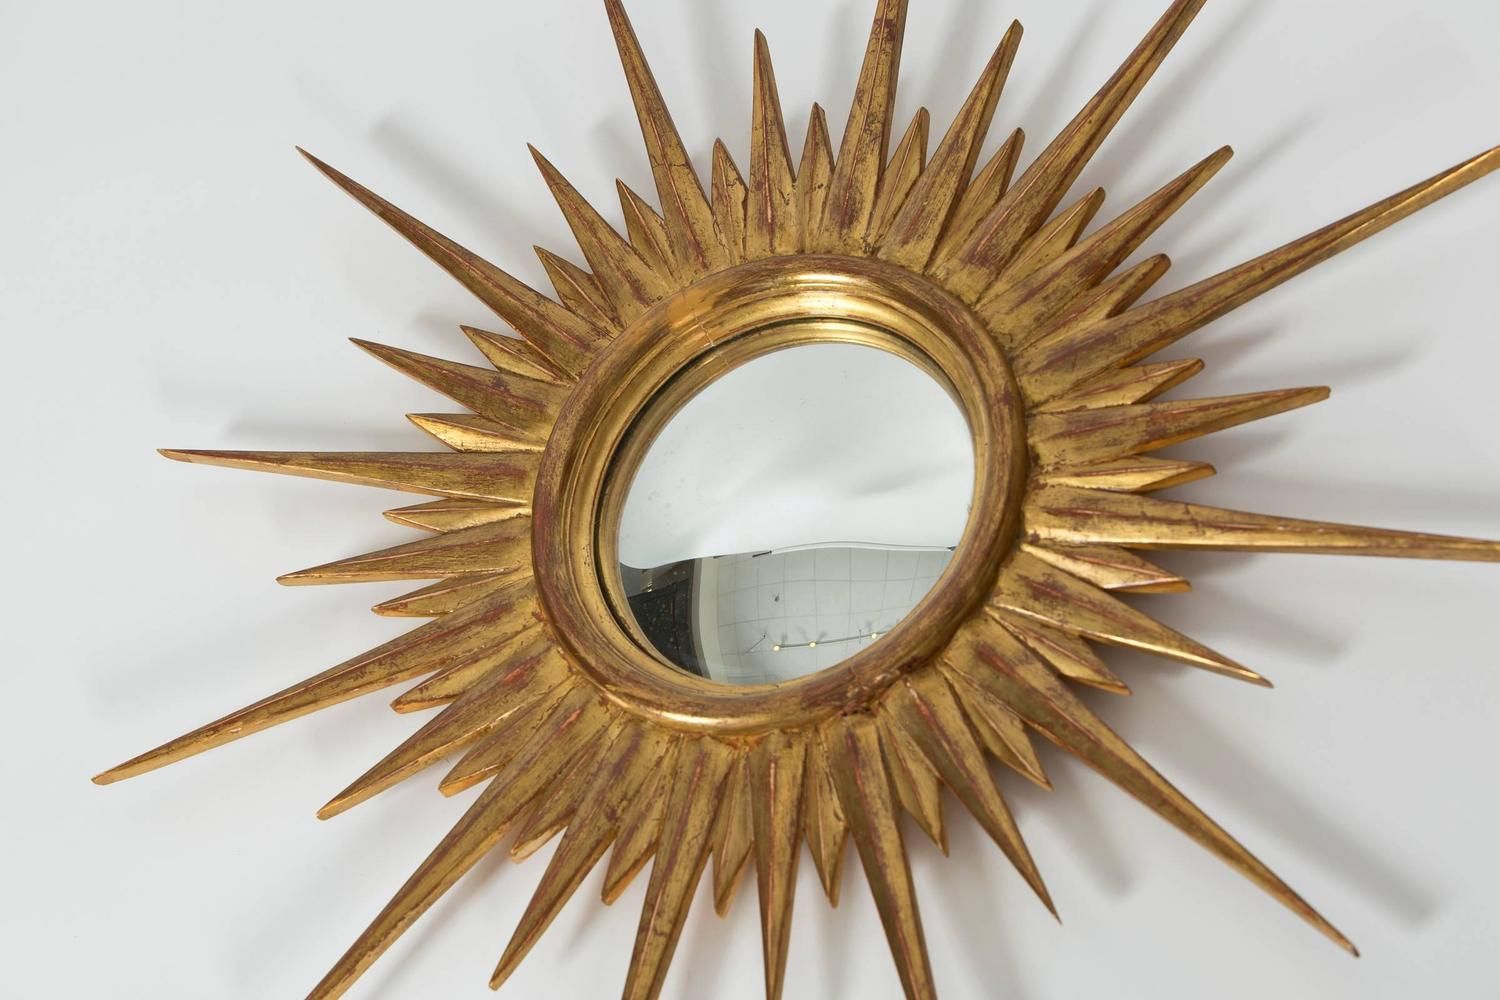 Antique Gold Leaf Sunburst Mirror At 1stdibs With Ring Shield Gold Leaf Wall Mirrors (View 6 of 15)